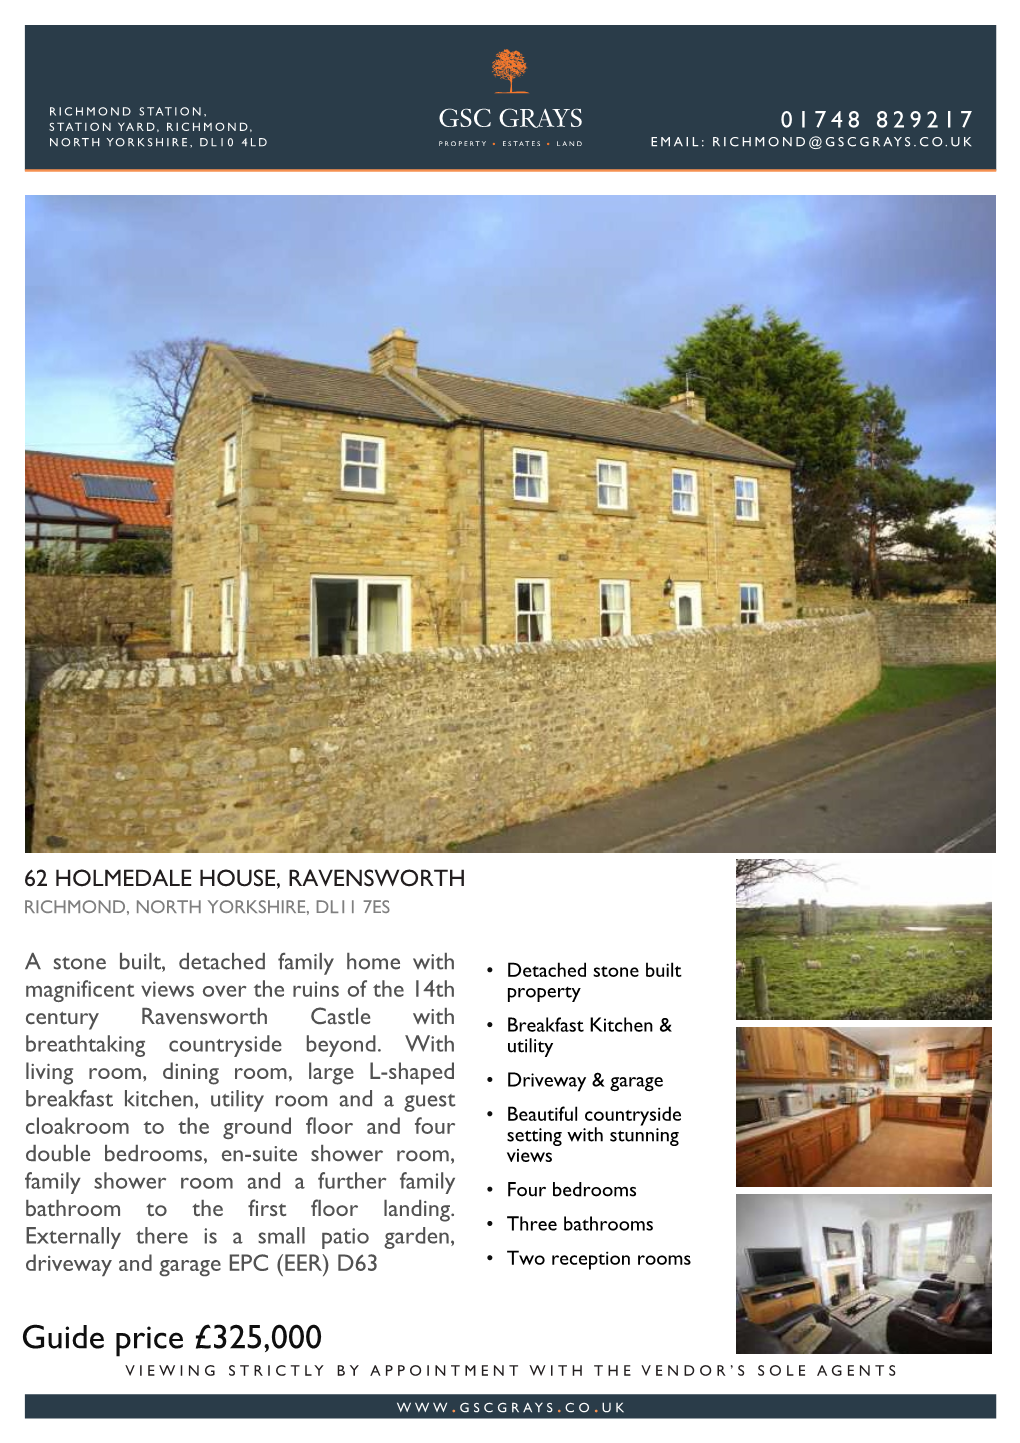 Guide Price £325,000 VIEWING STRICTLY by APPOINTMENT with the VENDOR’S SOLE AGENTS